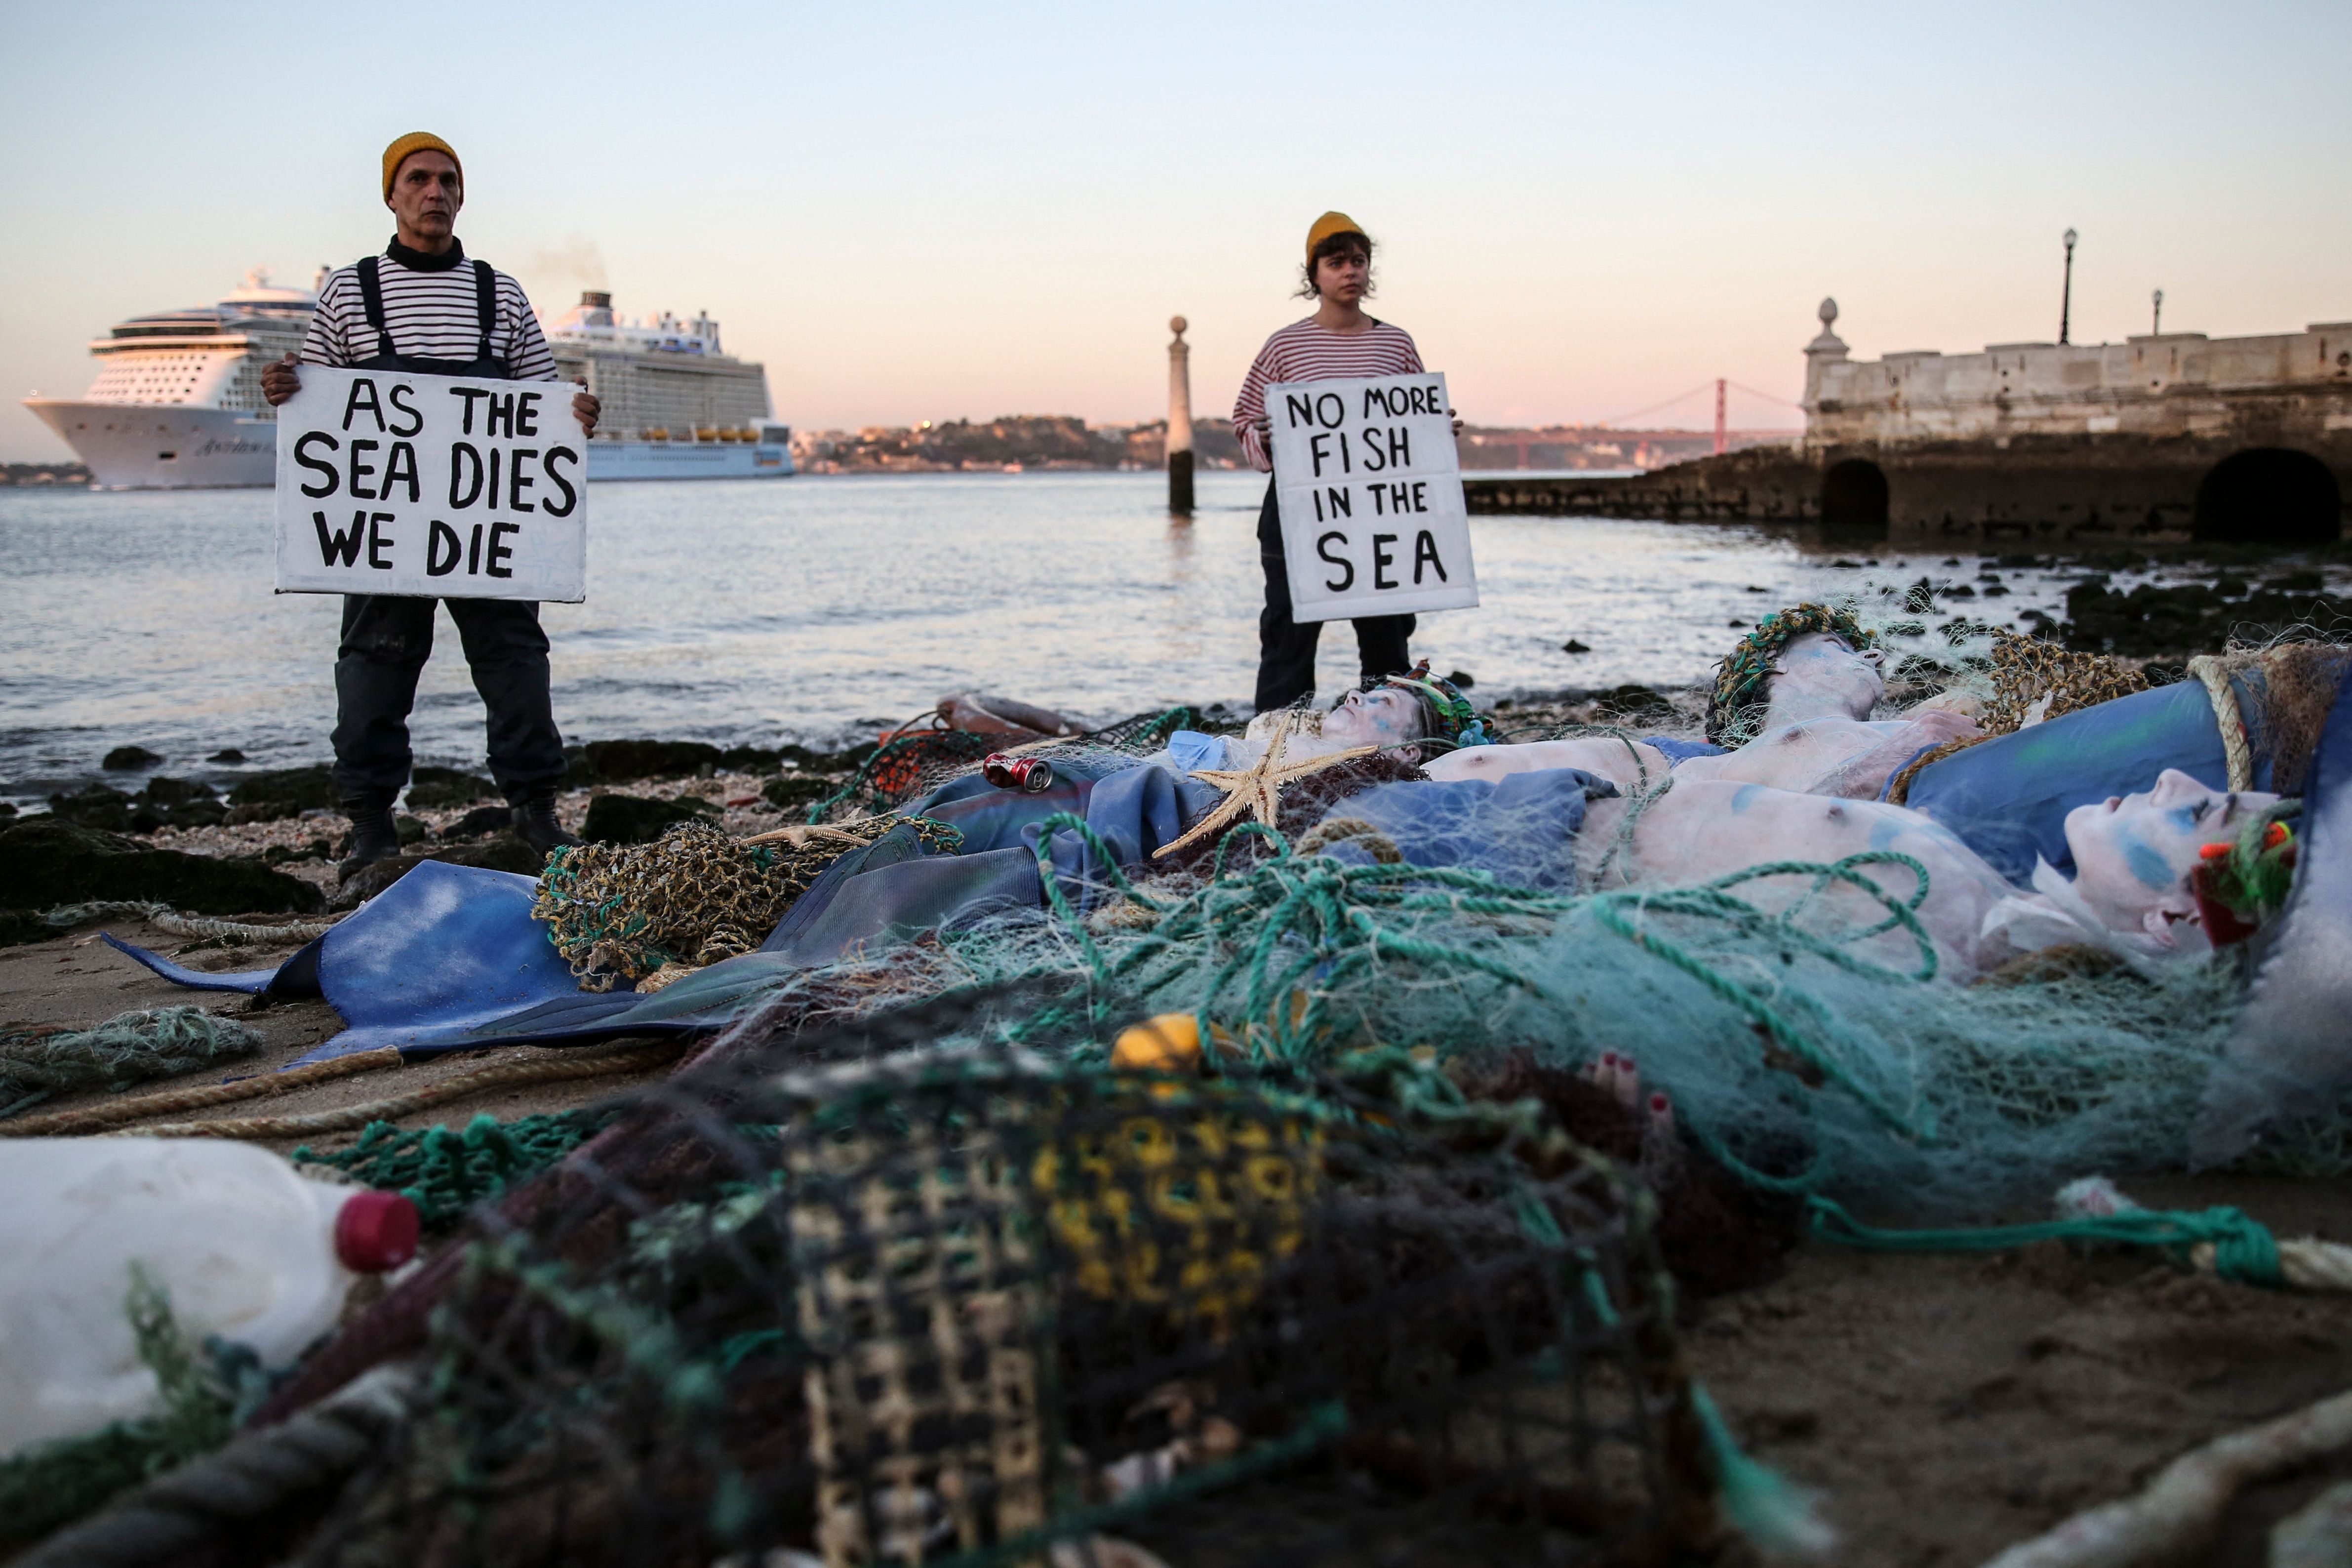 Ocean Rebellion activists hold banners reading “As the sea dies we die” and “No more fish in the sea” as they stage a protest in Terreiro do Paco, Lisbon on June 27, 2022, before the UN Ocean Conference